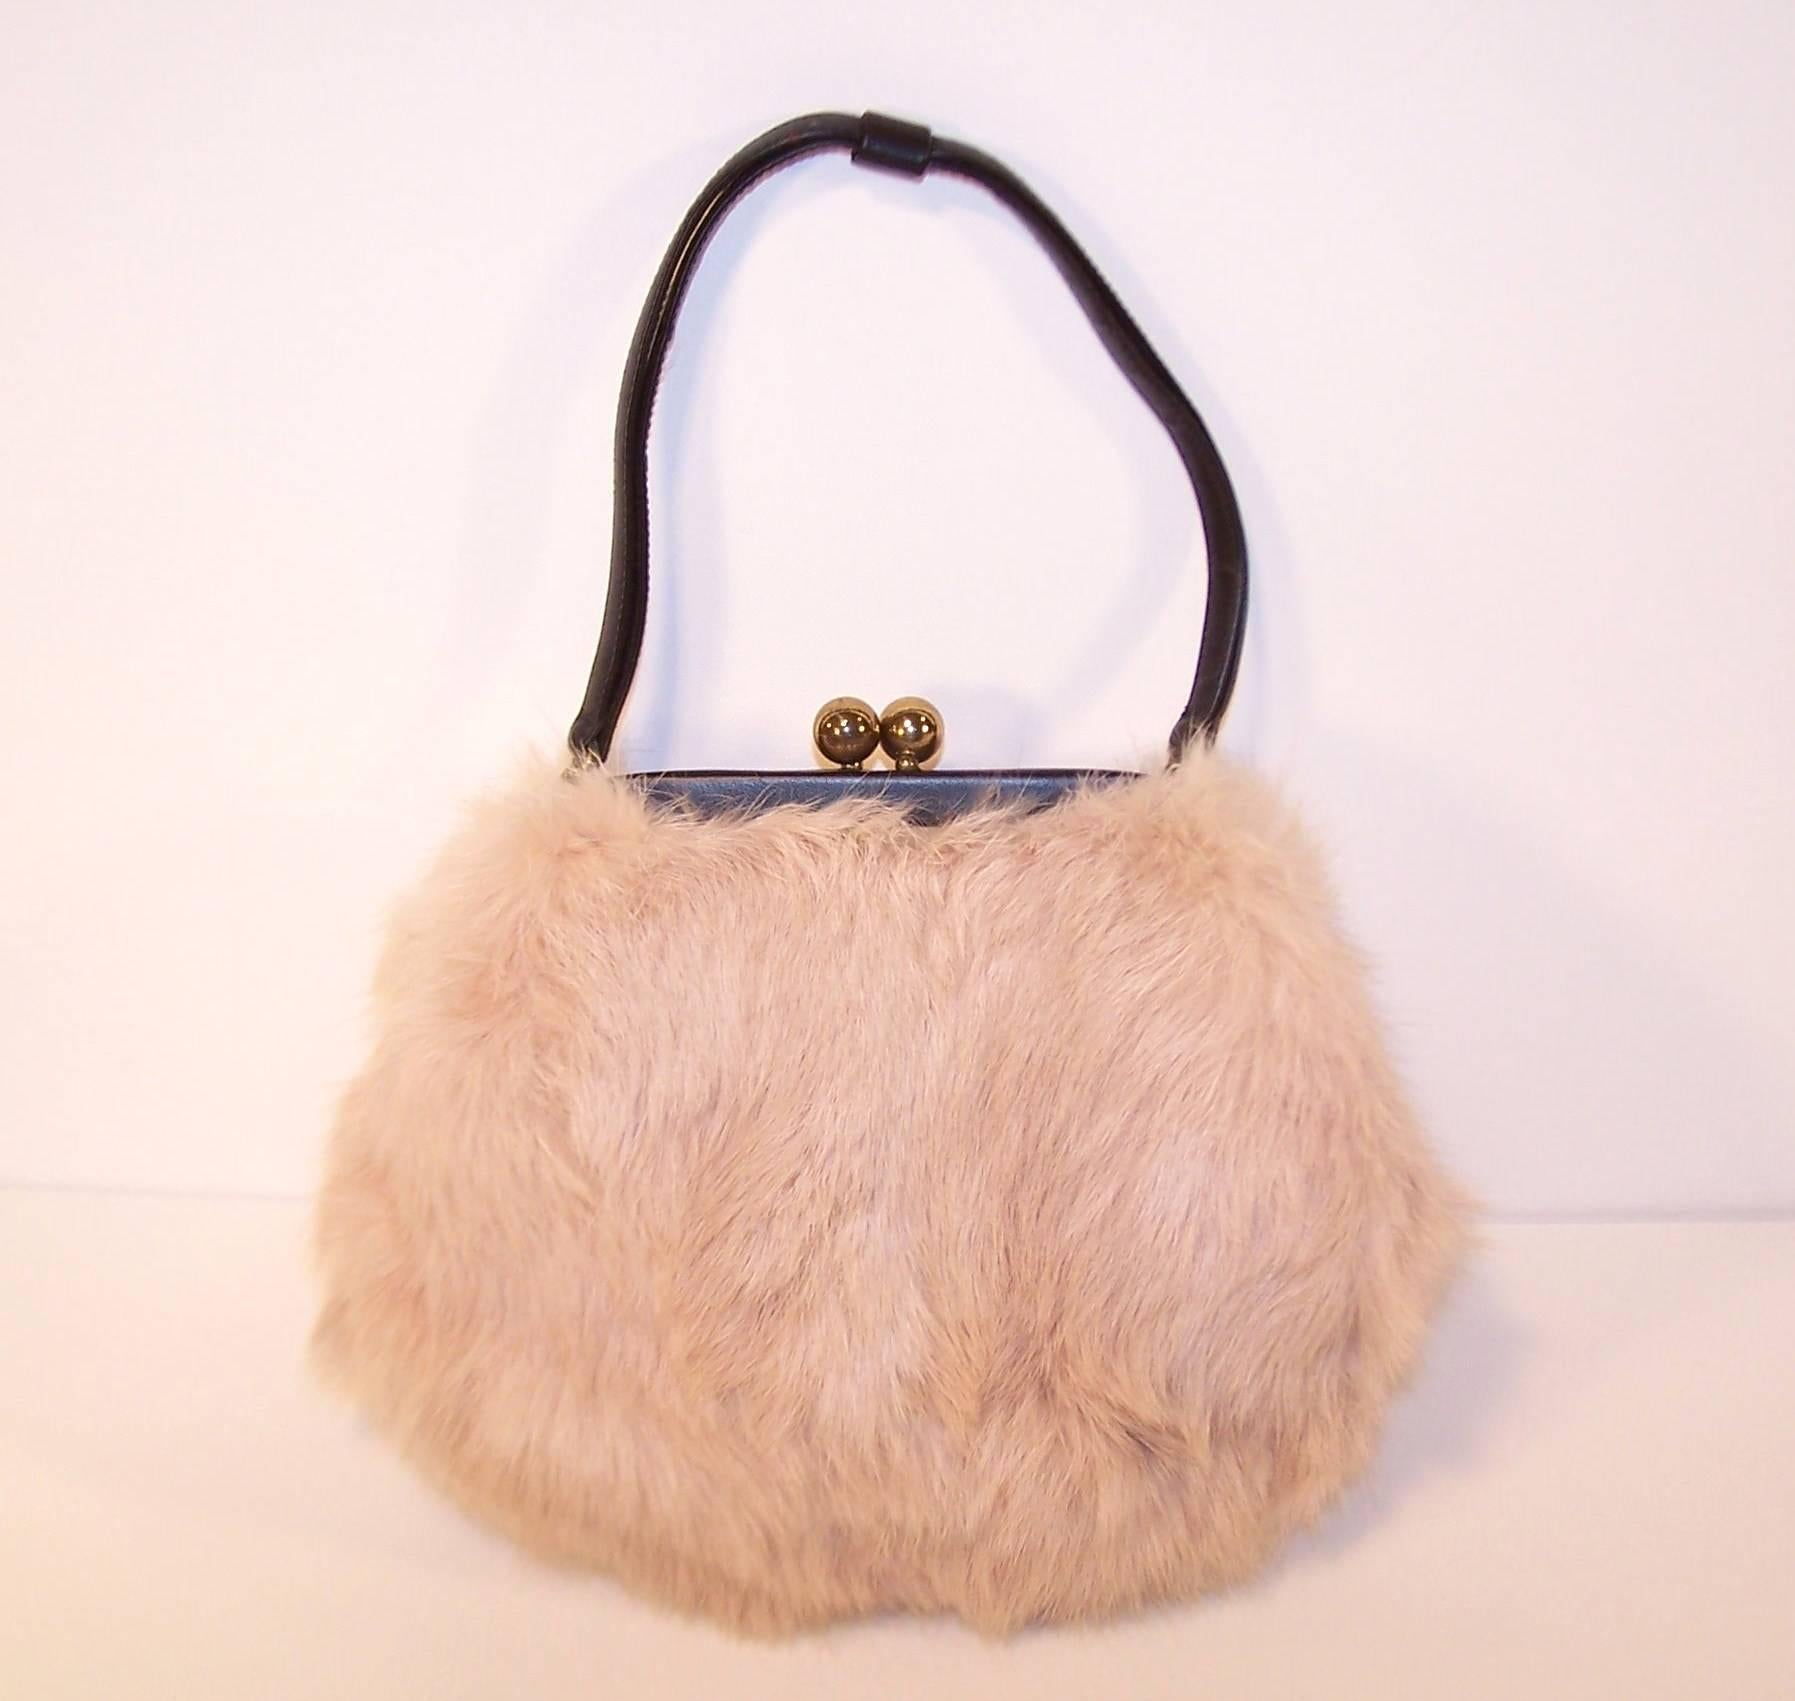 Everybody will want to touch this ballerina pink fur handbag by Morris Moskowitz ... and who could blame them.  This sweet little design has a black leather frame and handle with a kiss lock closure and silk faille lining.  The original coin purse